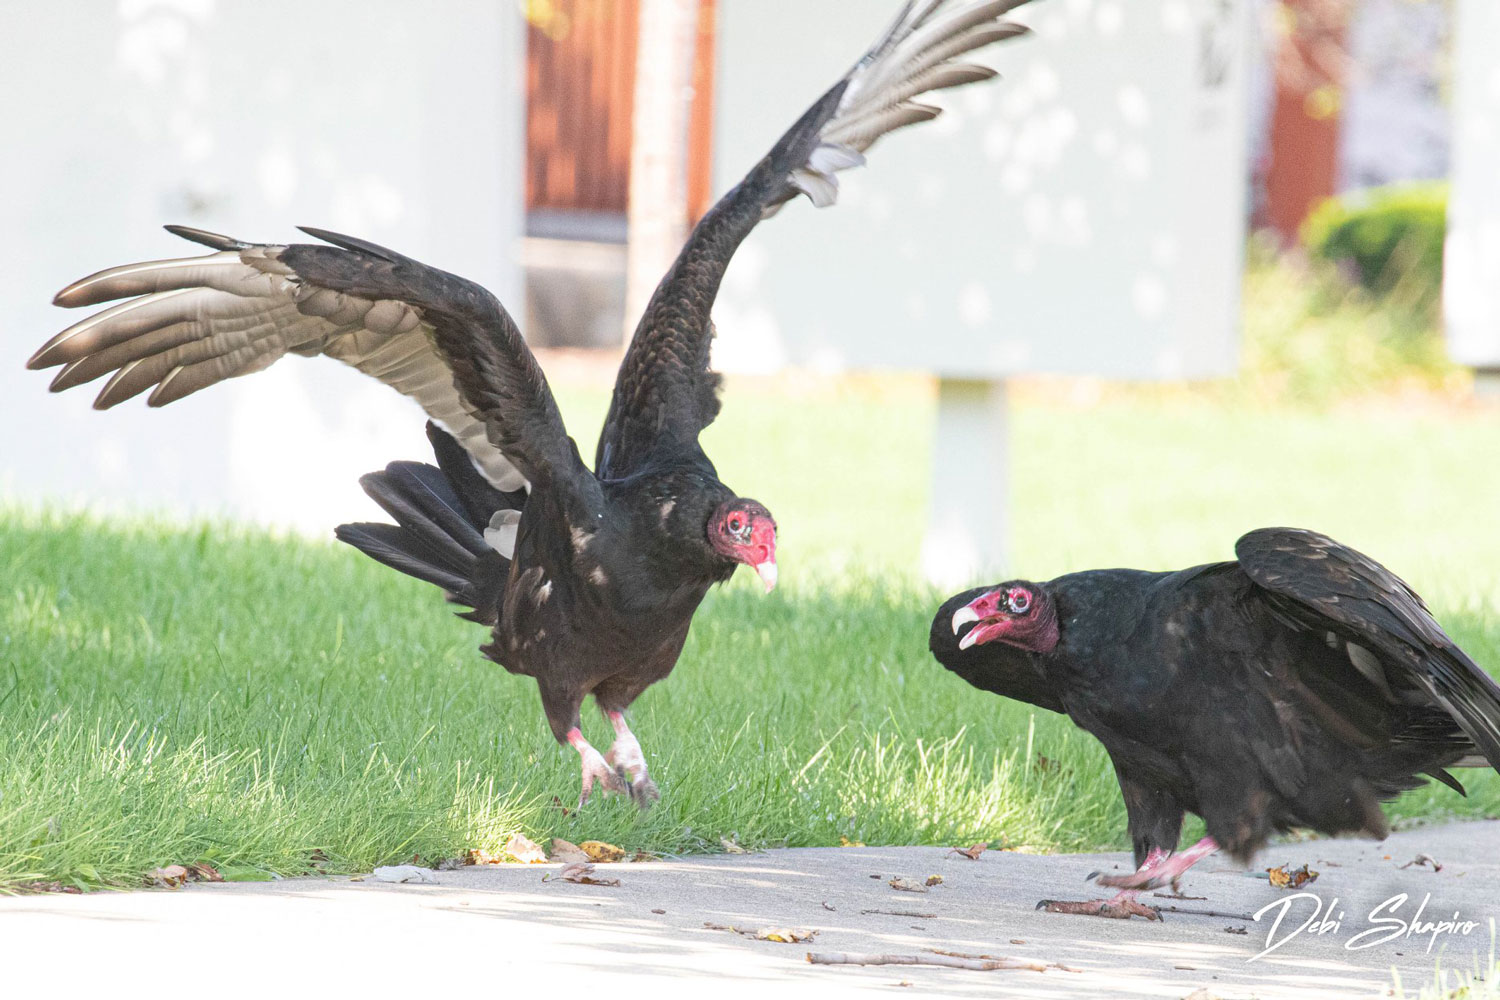 A turkey vulture, with its dark body and red head, comes in for landing next to another on a path.